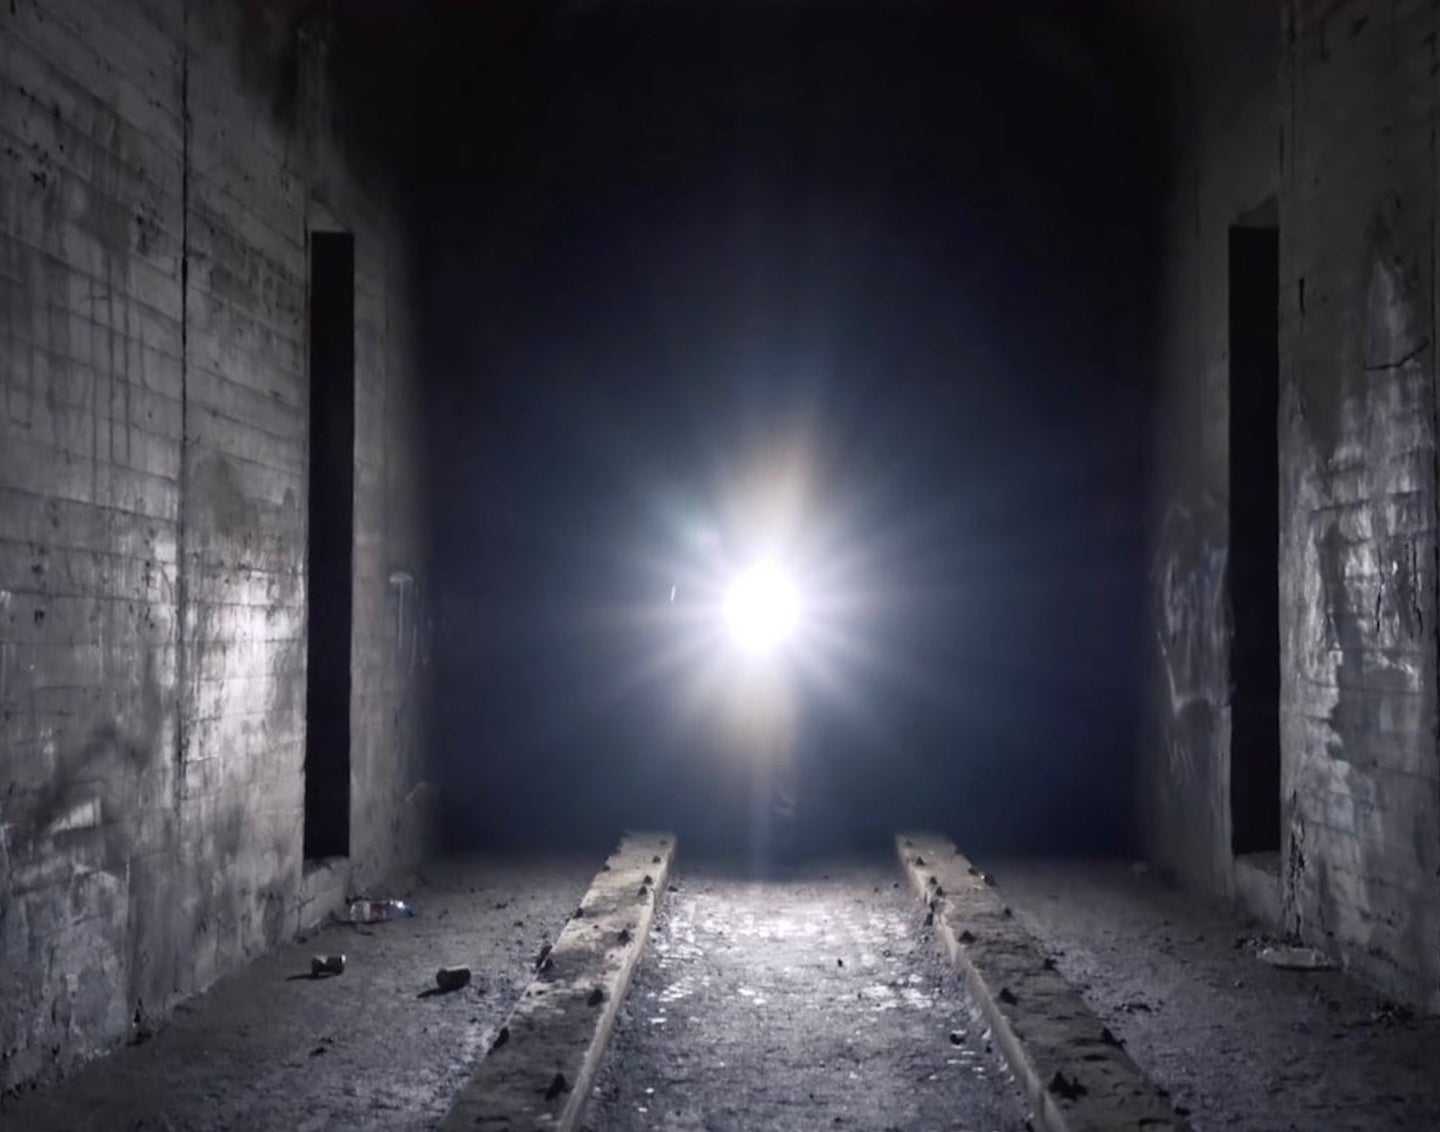 Cincinnati abandoned subway tunnel in a screenshot from a documentary